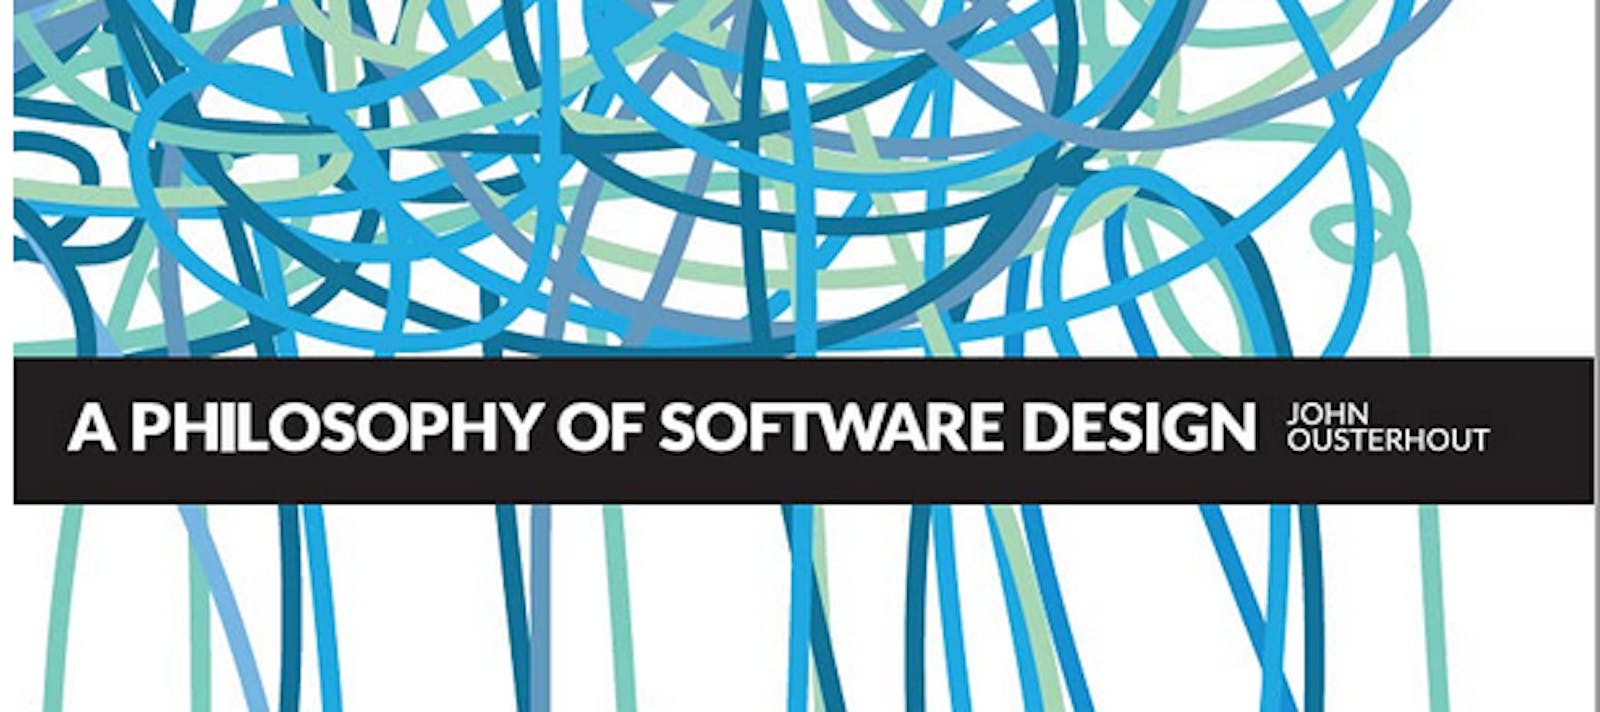 About "A Philosophy of Software Design" book